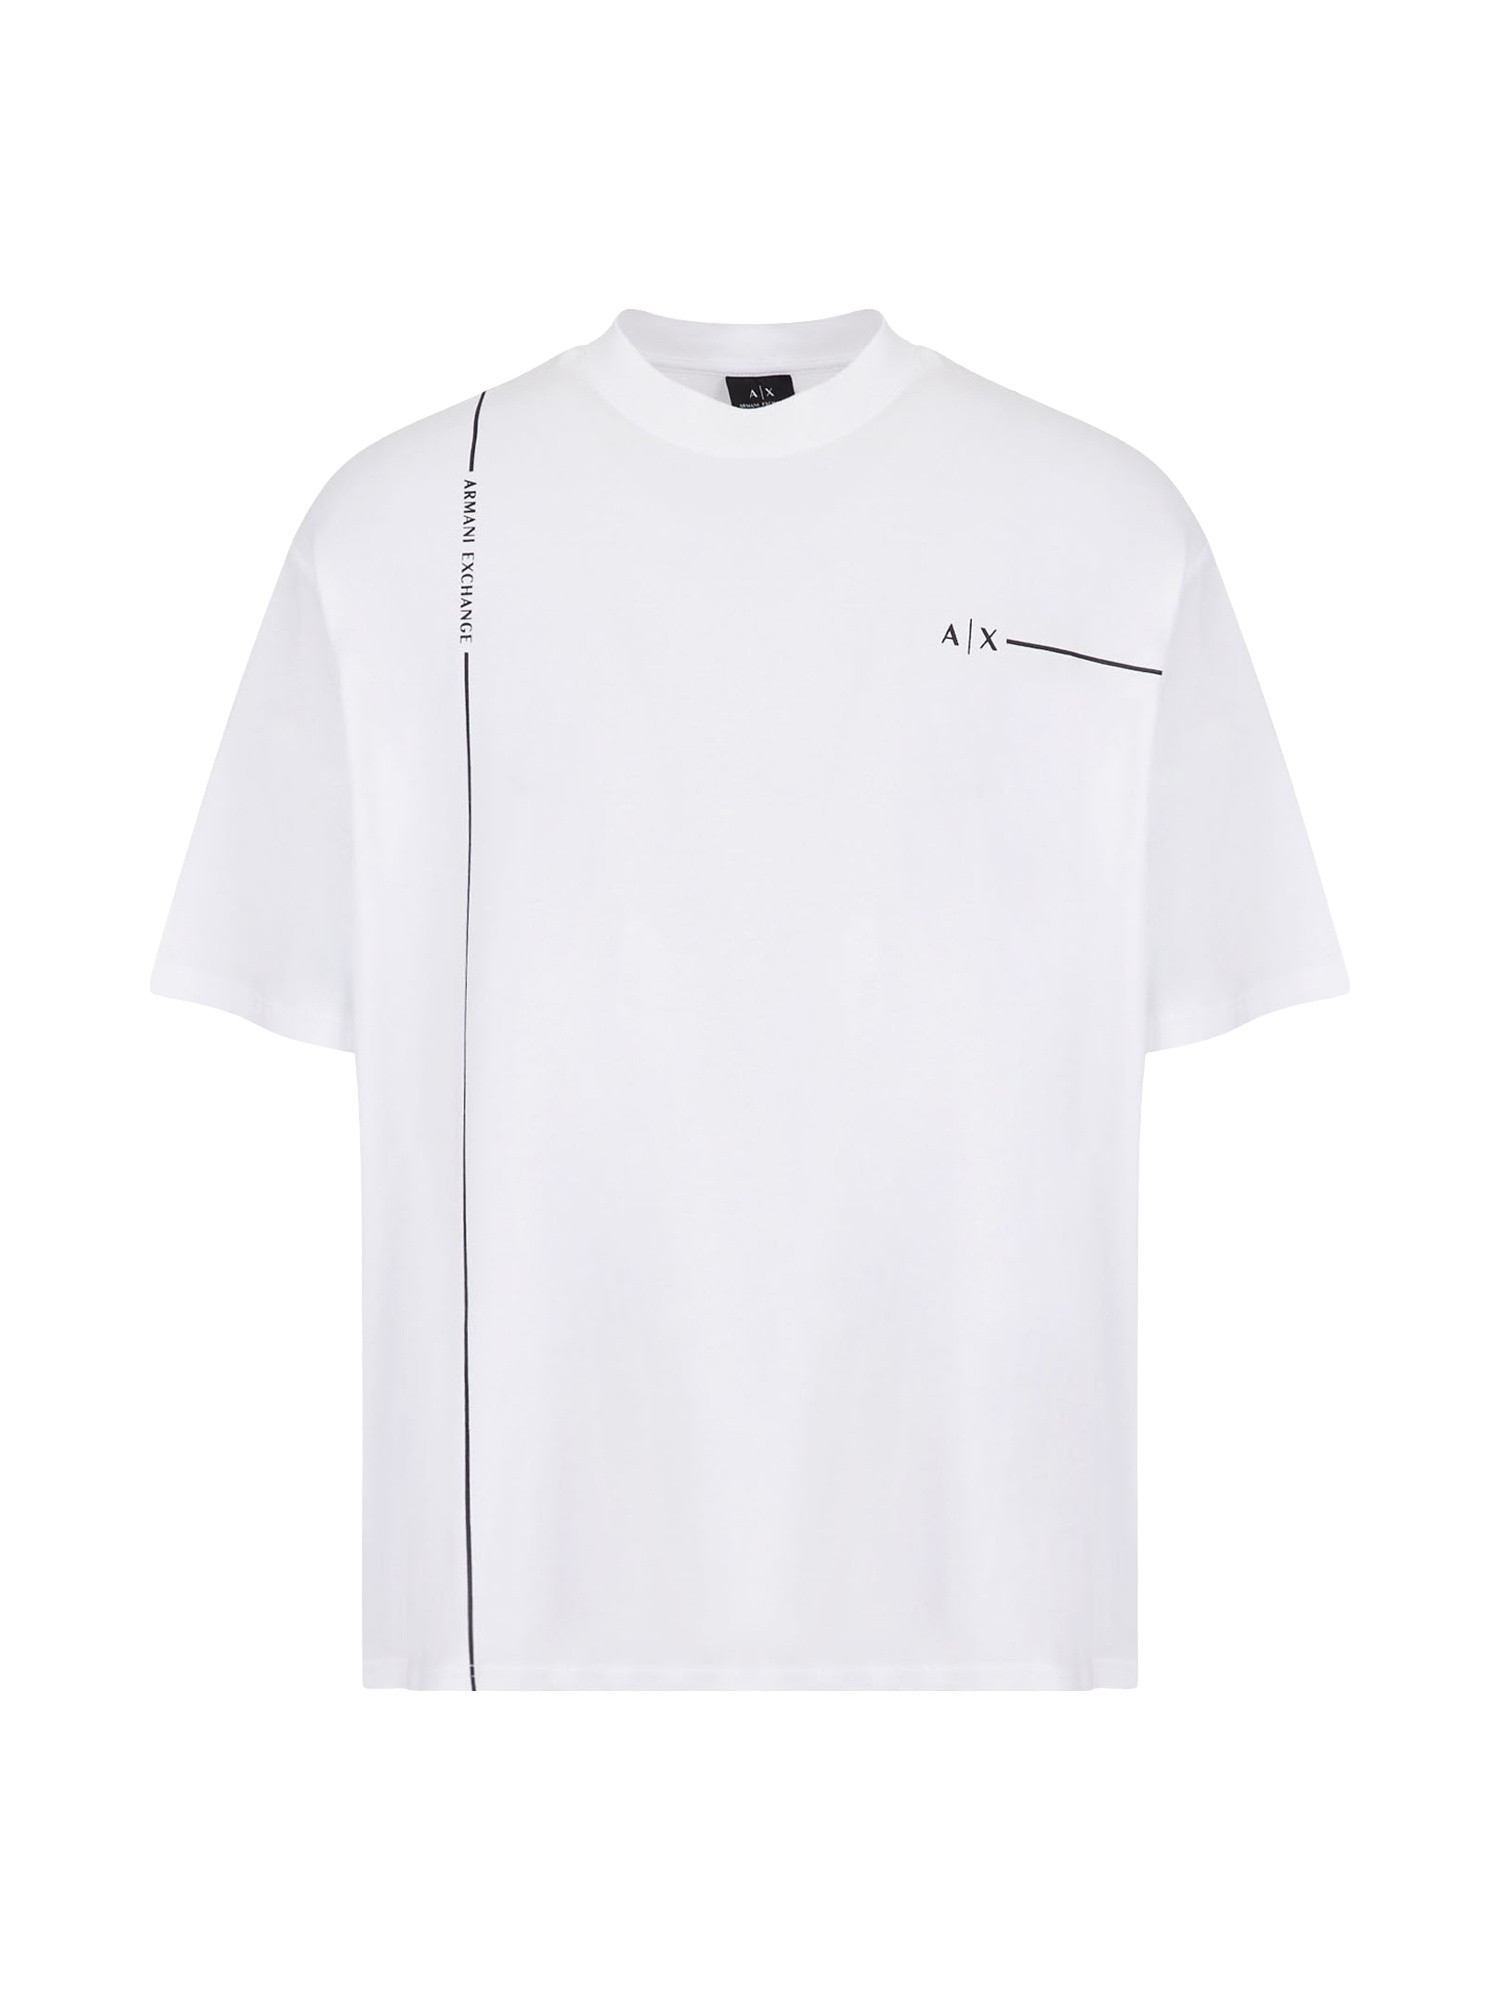 Armani Exchange - T-shirt with relaxed fit logo, White, large image number 0